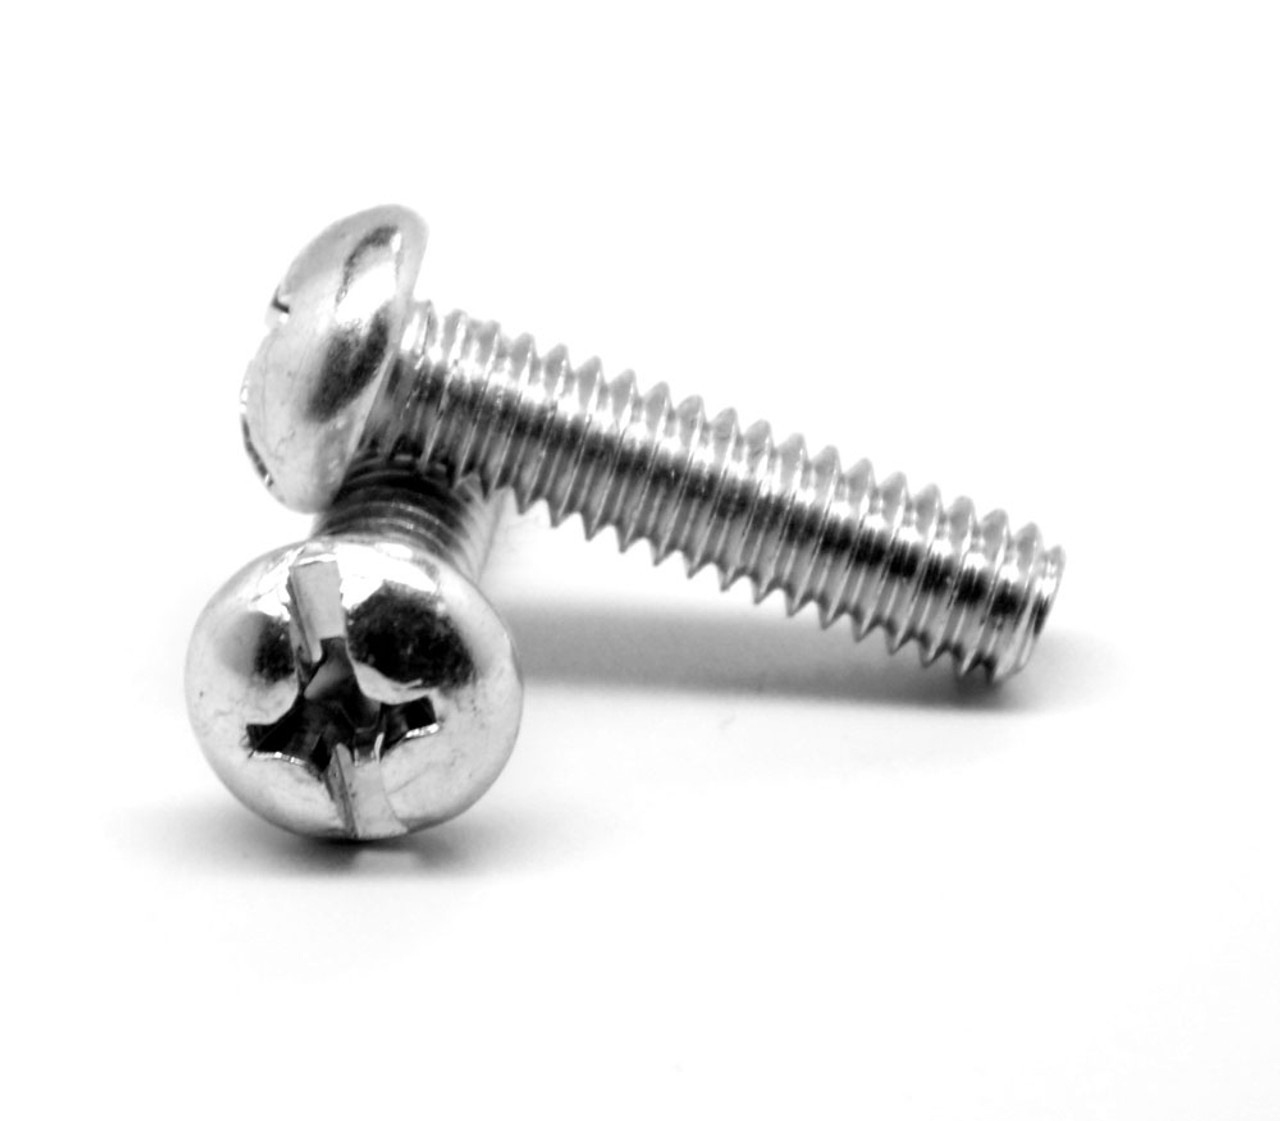 1/4"-20 x 6" (FT) Coarse Thread Machine Screw Combo (Phillips/Slotted) Round Head Low Carbon Steel Zinc Plated